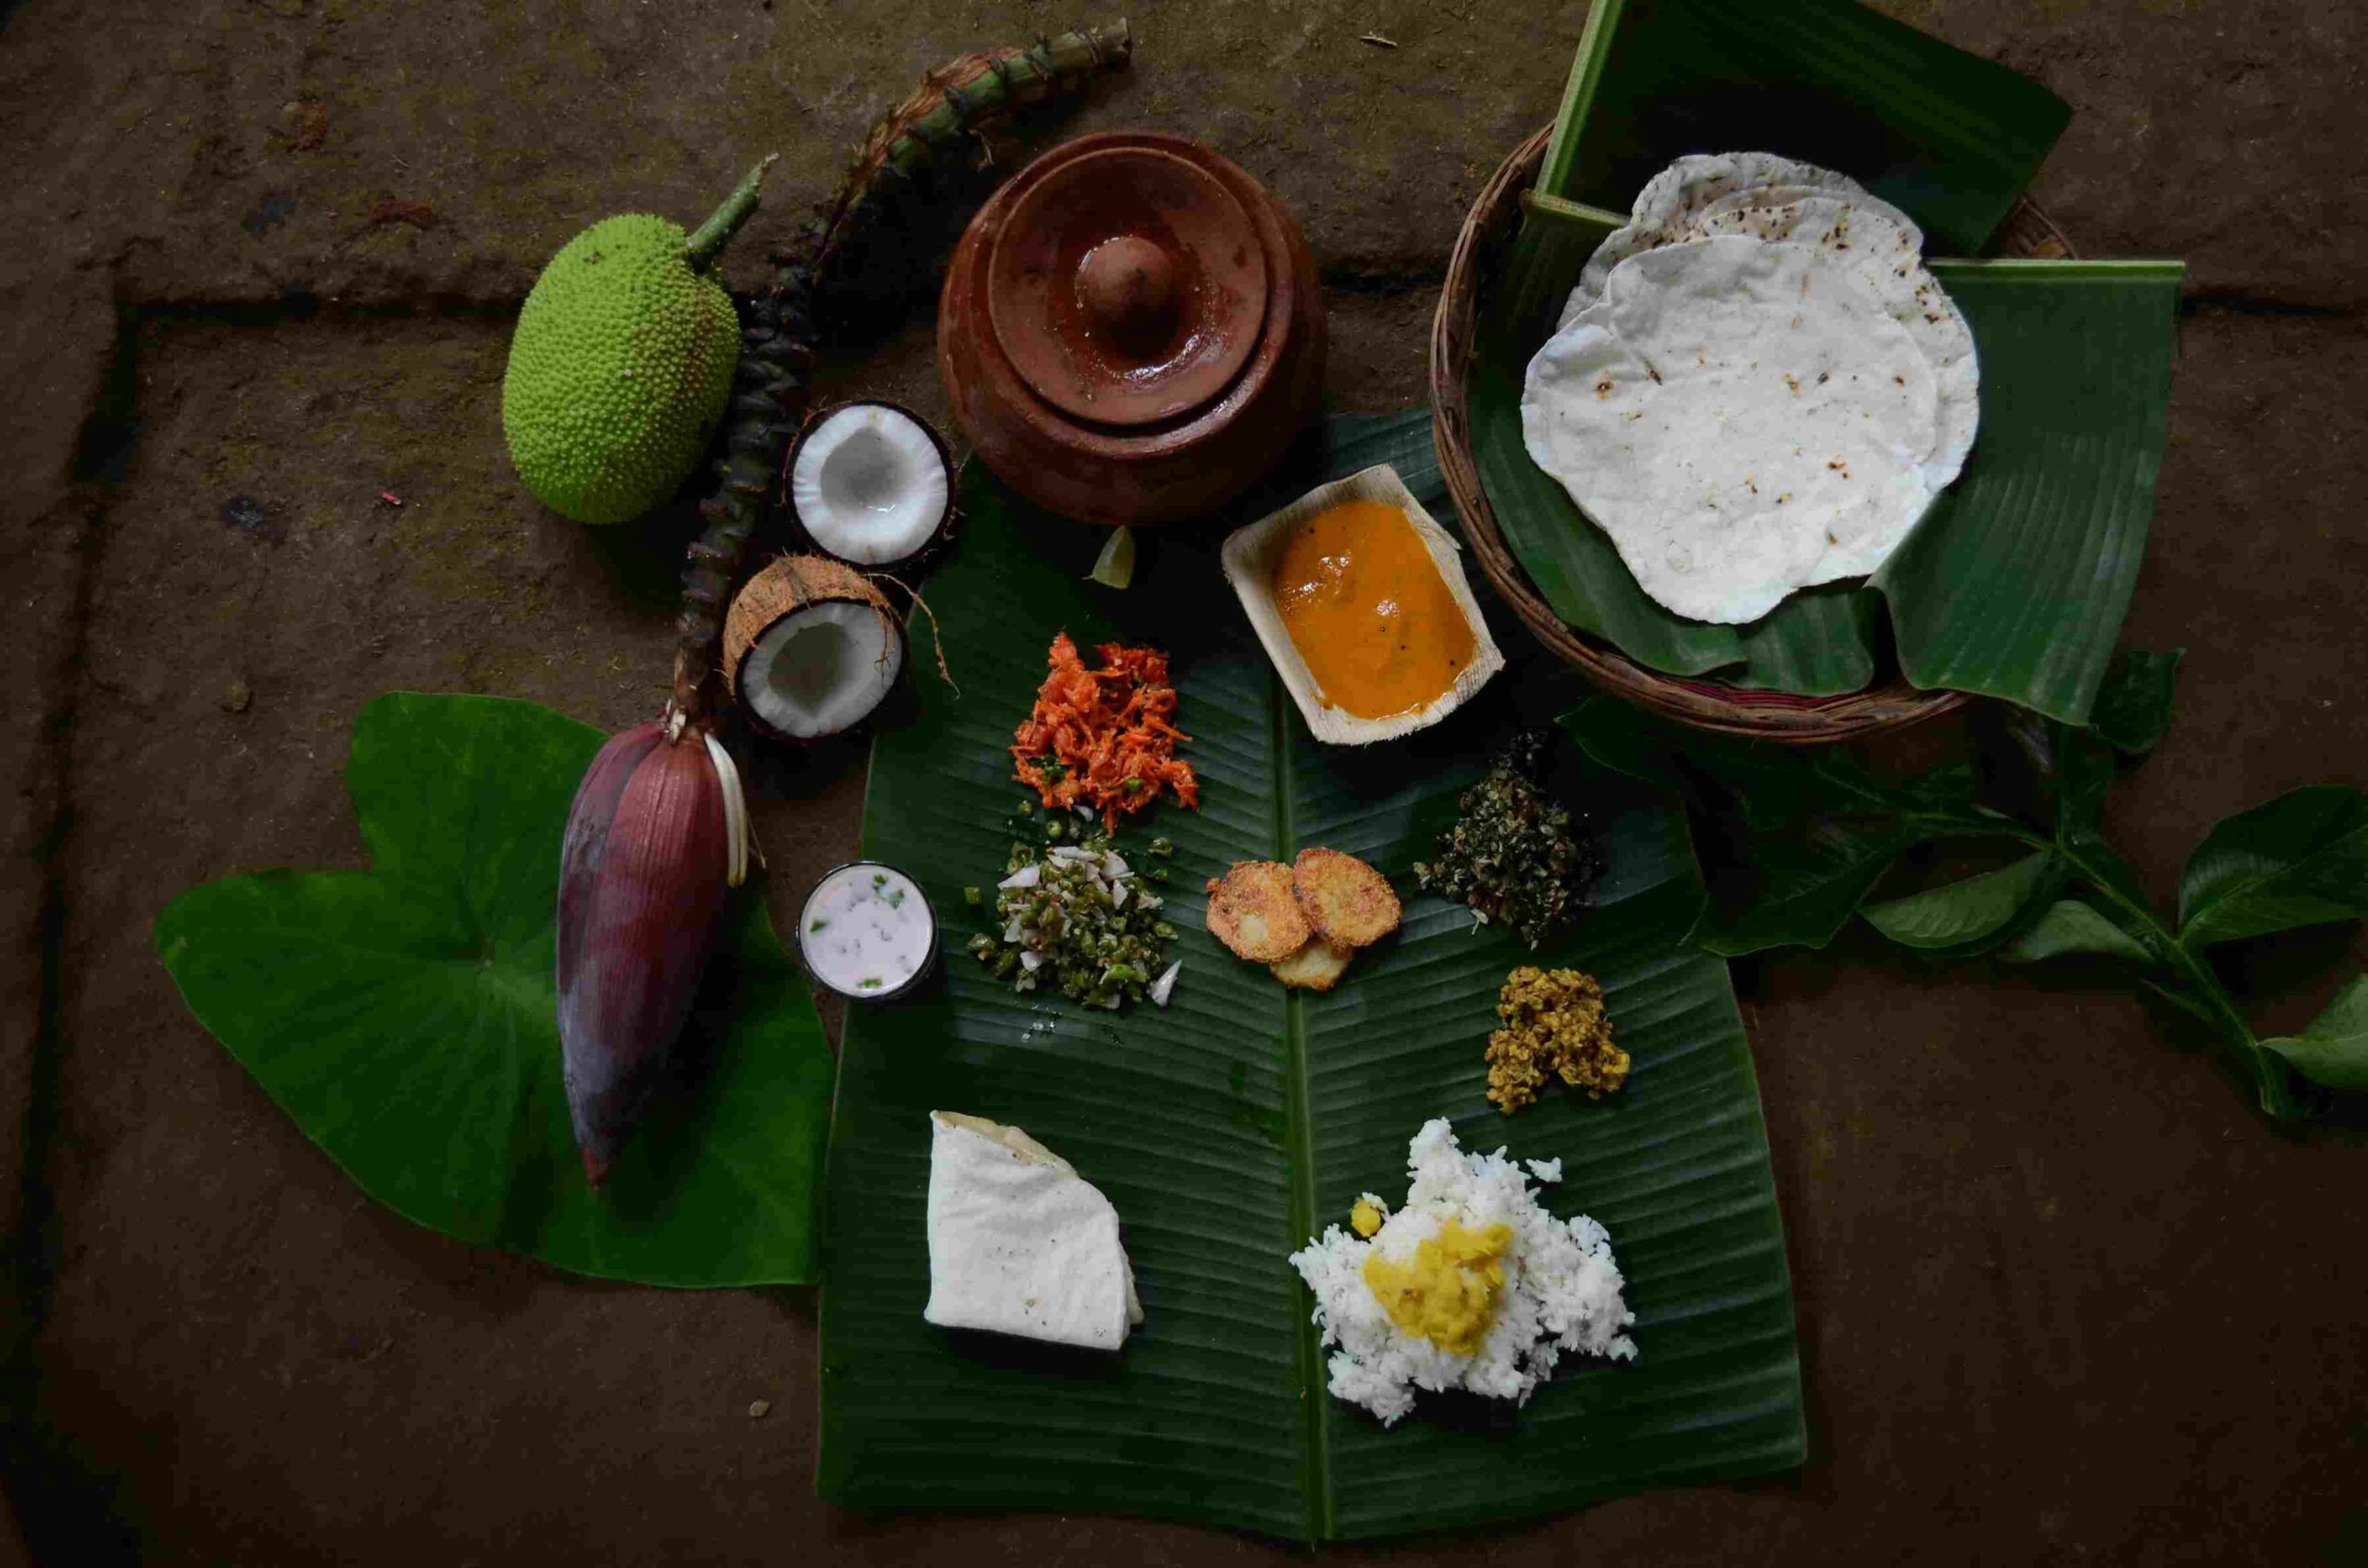 A traditional Konkan feast is prepared for guests by the local women at the farmstay